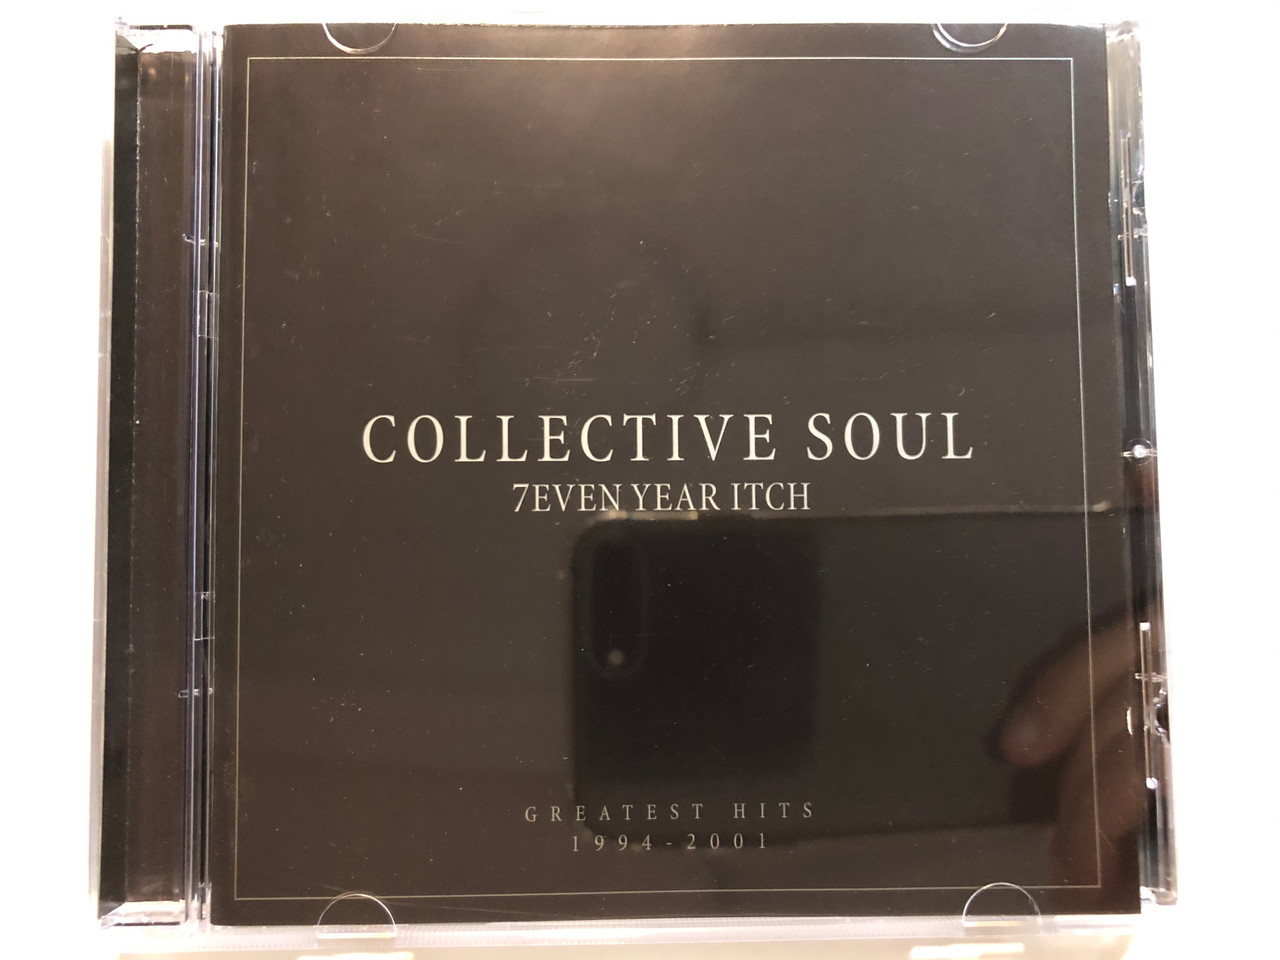 https://cdn10.bigcommerce.com/s-62bdpkt7pb/products/29357/images/175116/Collective_Soul_7even_Year_Itch_Greatest_Hits_1994-2001_Atlantic_Audio_CD_2001_7567-93076-2_1__12974.1618424525.1280.1280.JPG?c=2&_ga=2.15753333.2106526039.1618490327-95516592.1618490327